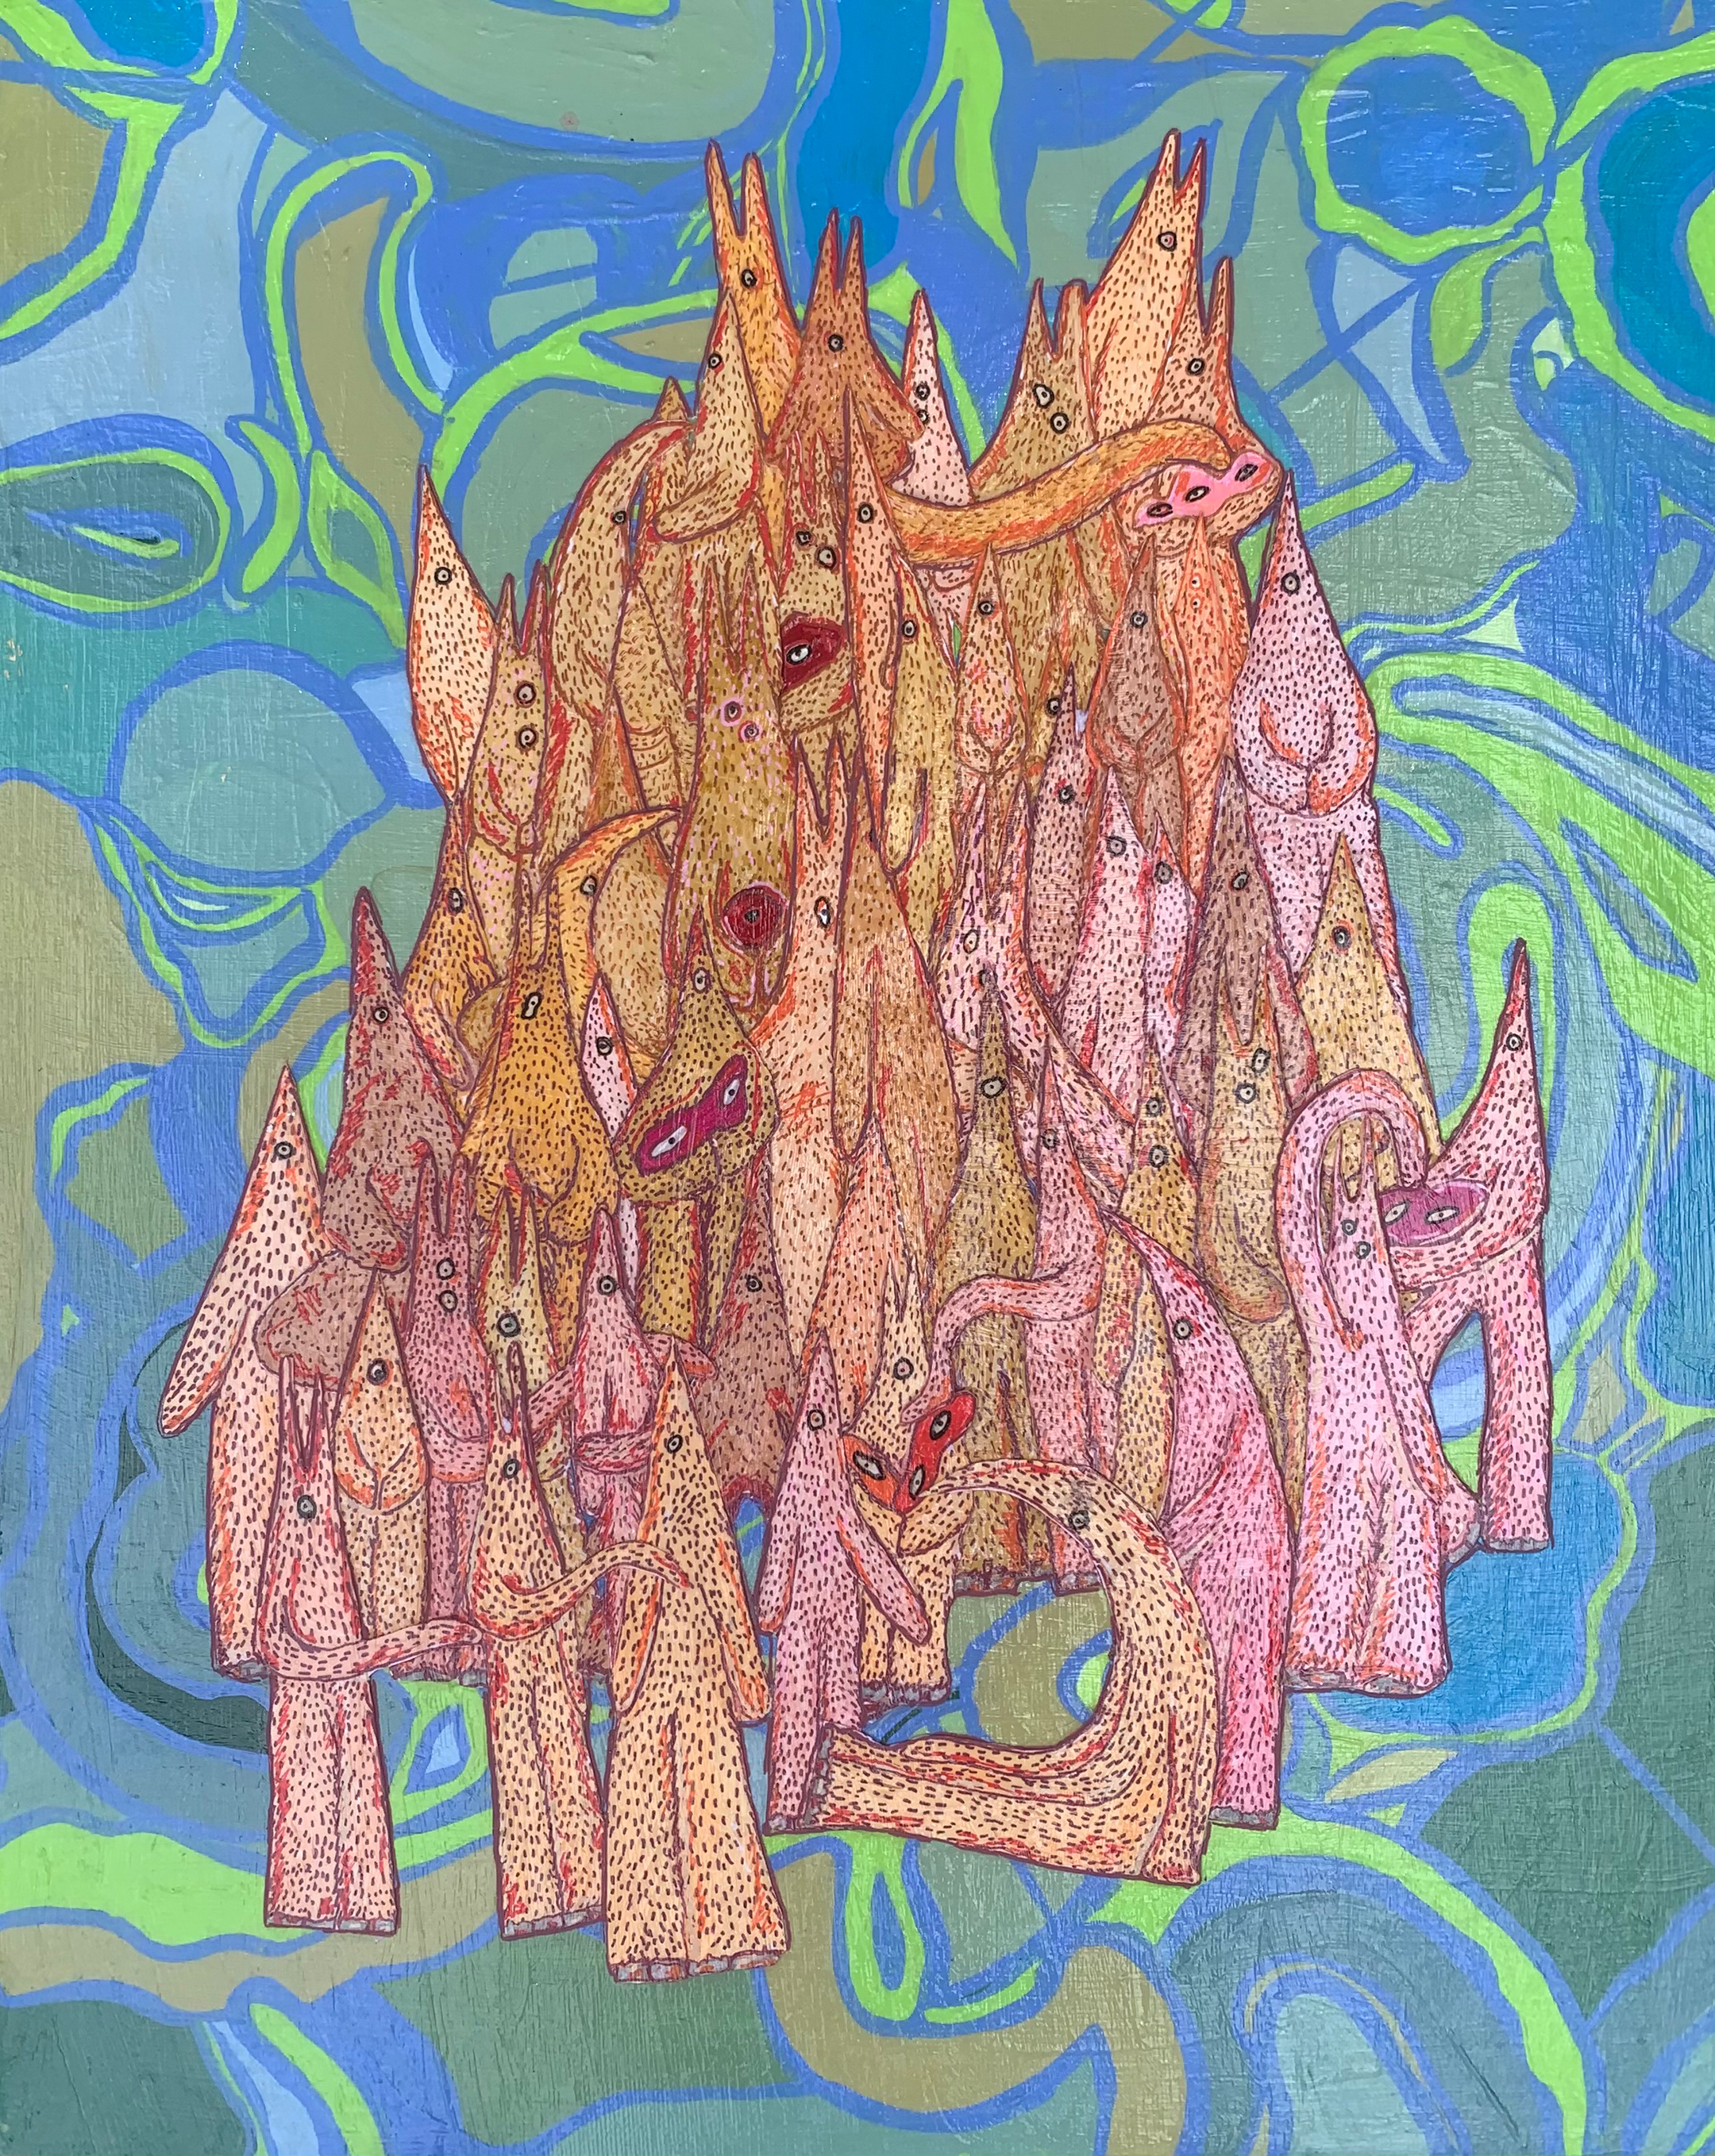 Painting of angular aliens in peach and pink against an abstract blue and green background